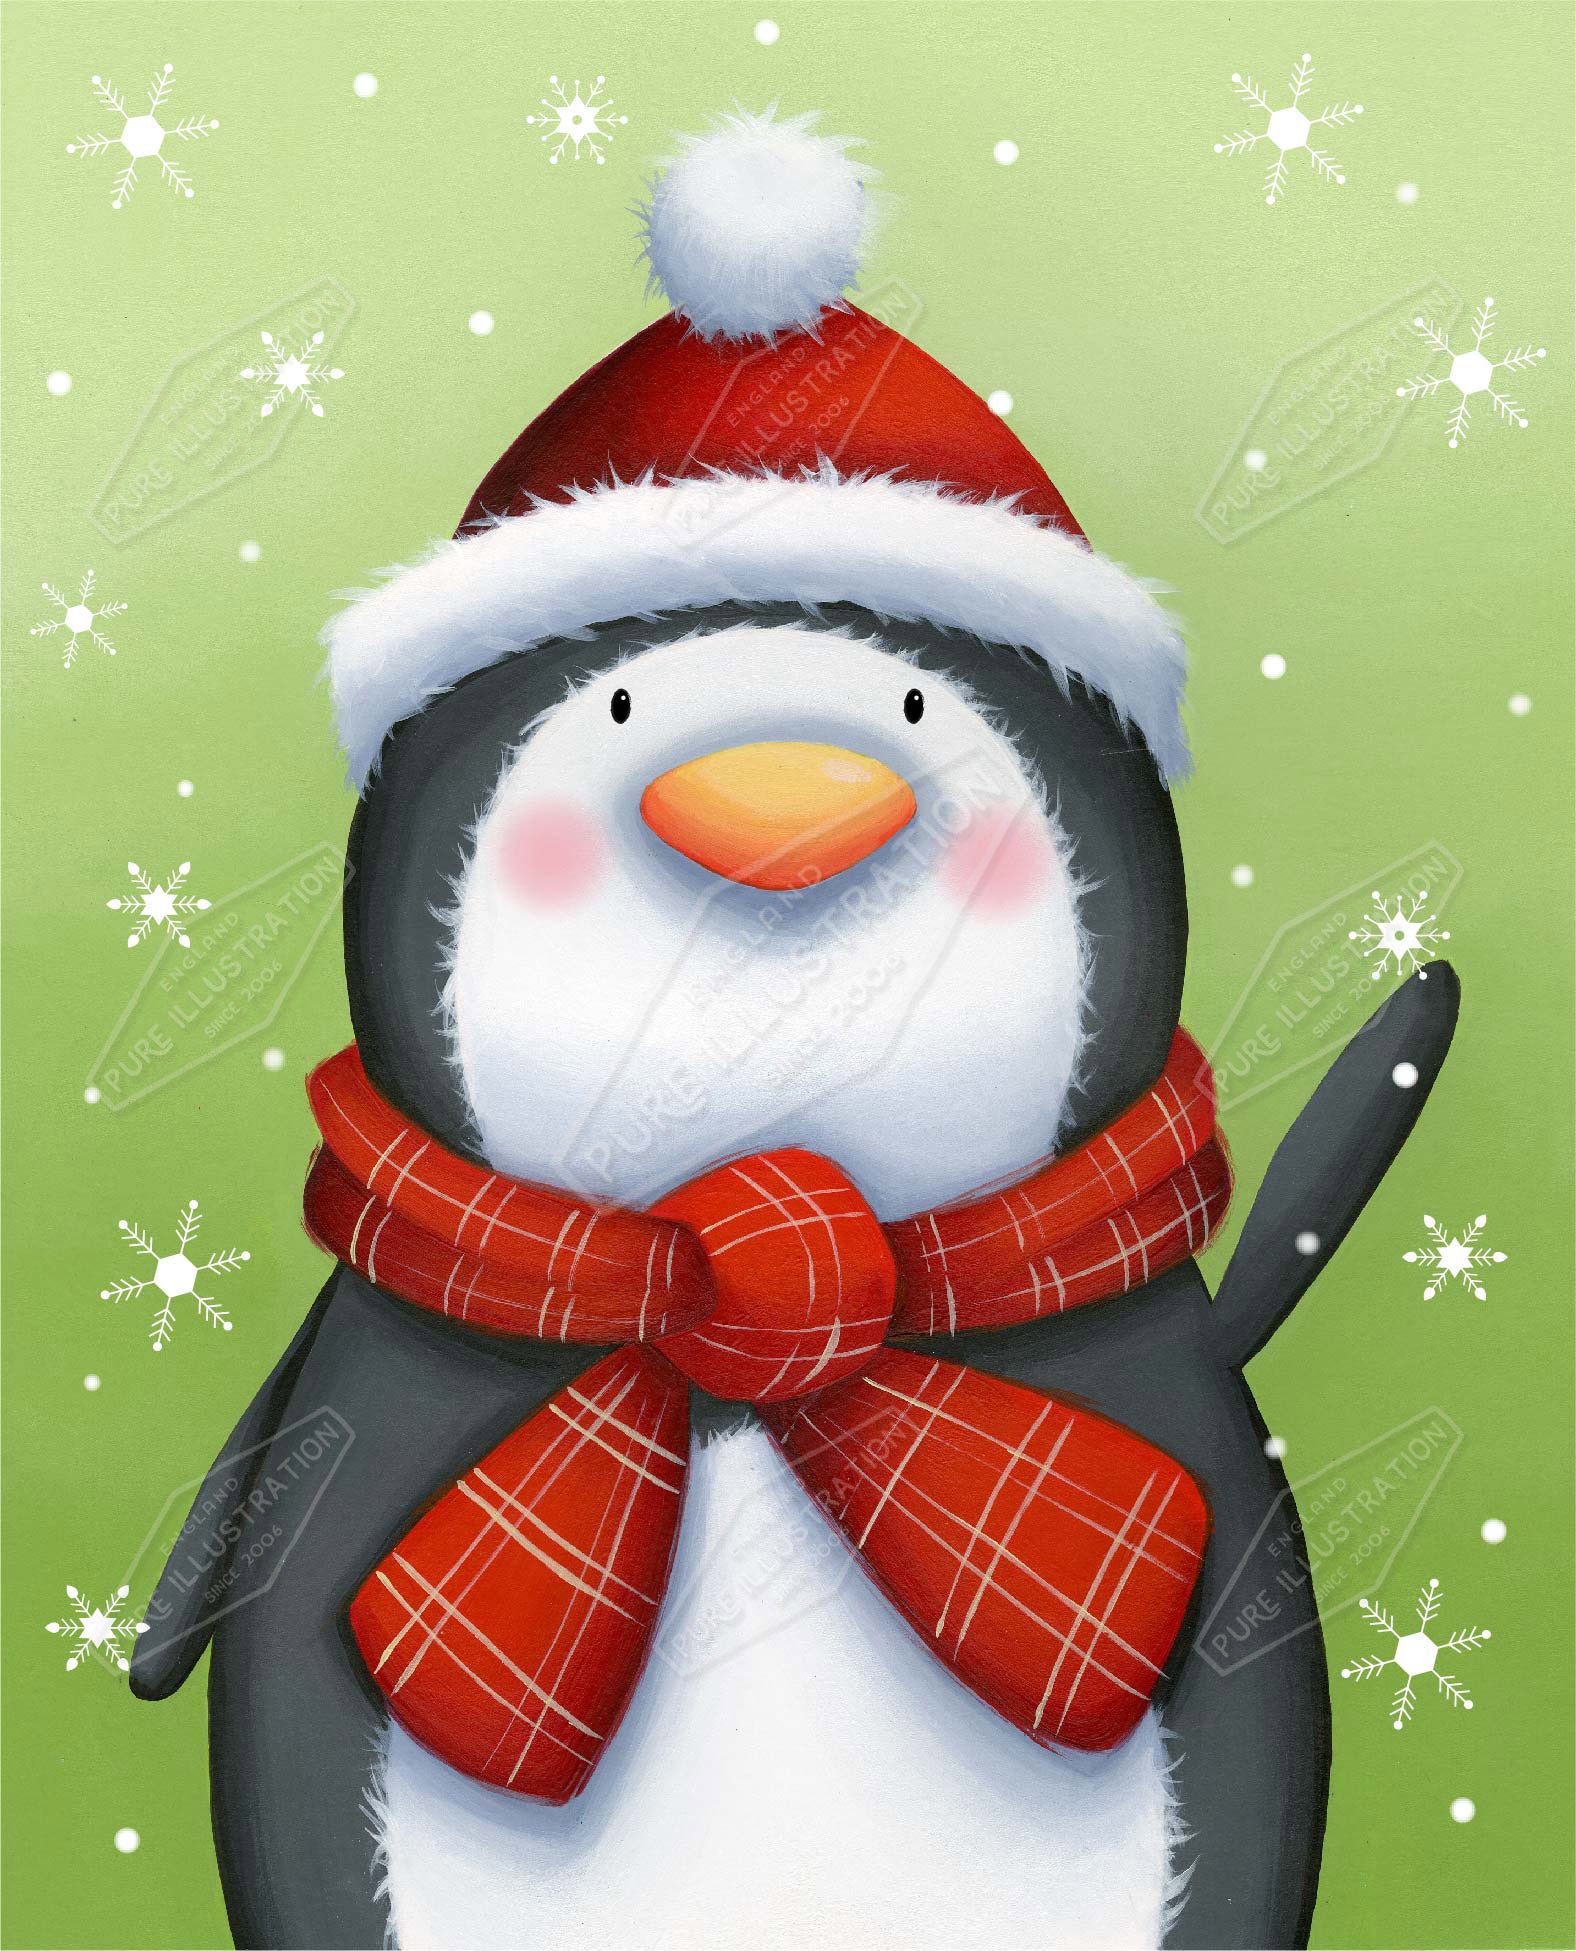 00035102SPI- Sarah Pitt is represented by Pure Art Licensing Agency - Christmas Greeting Card Design